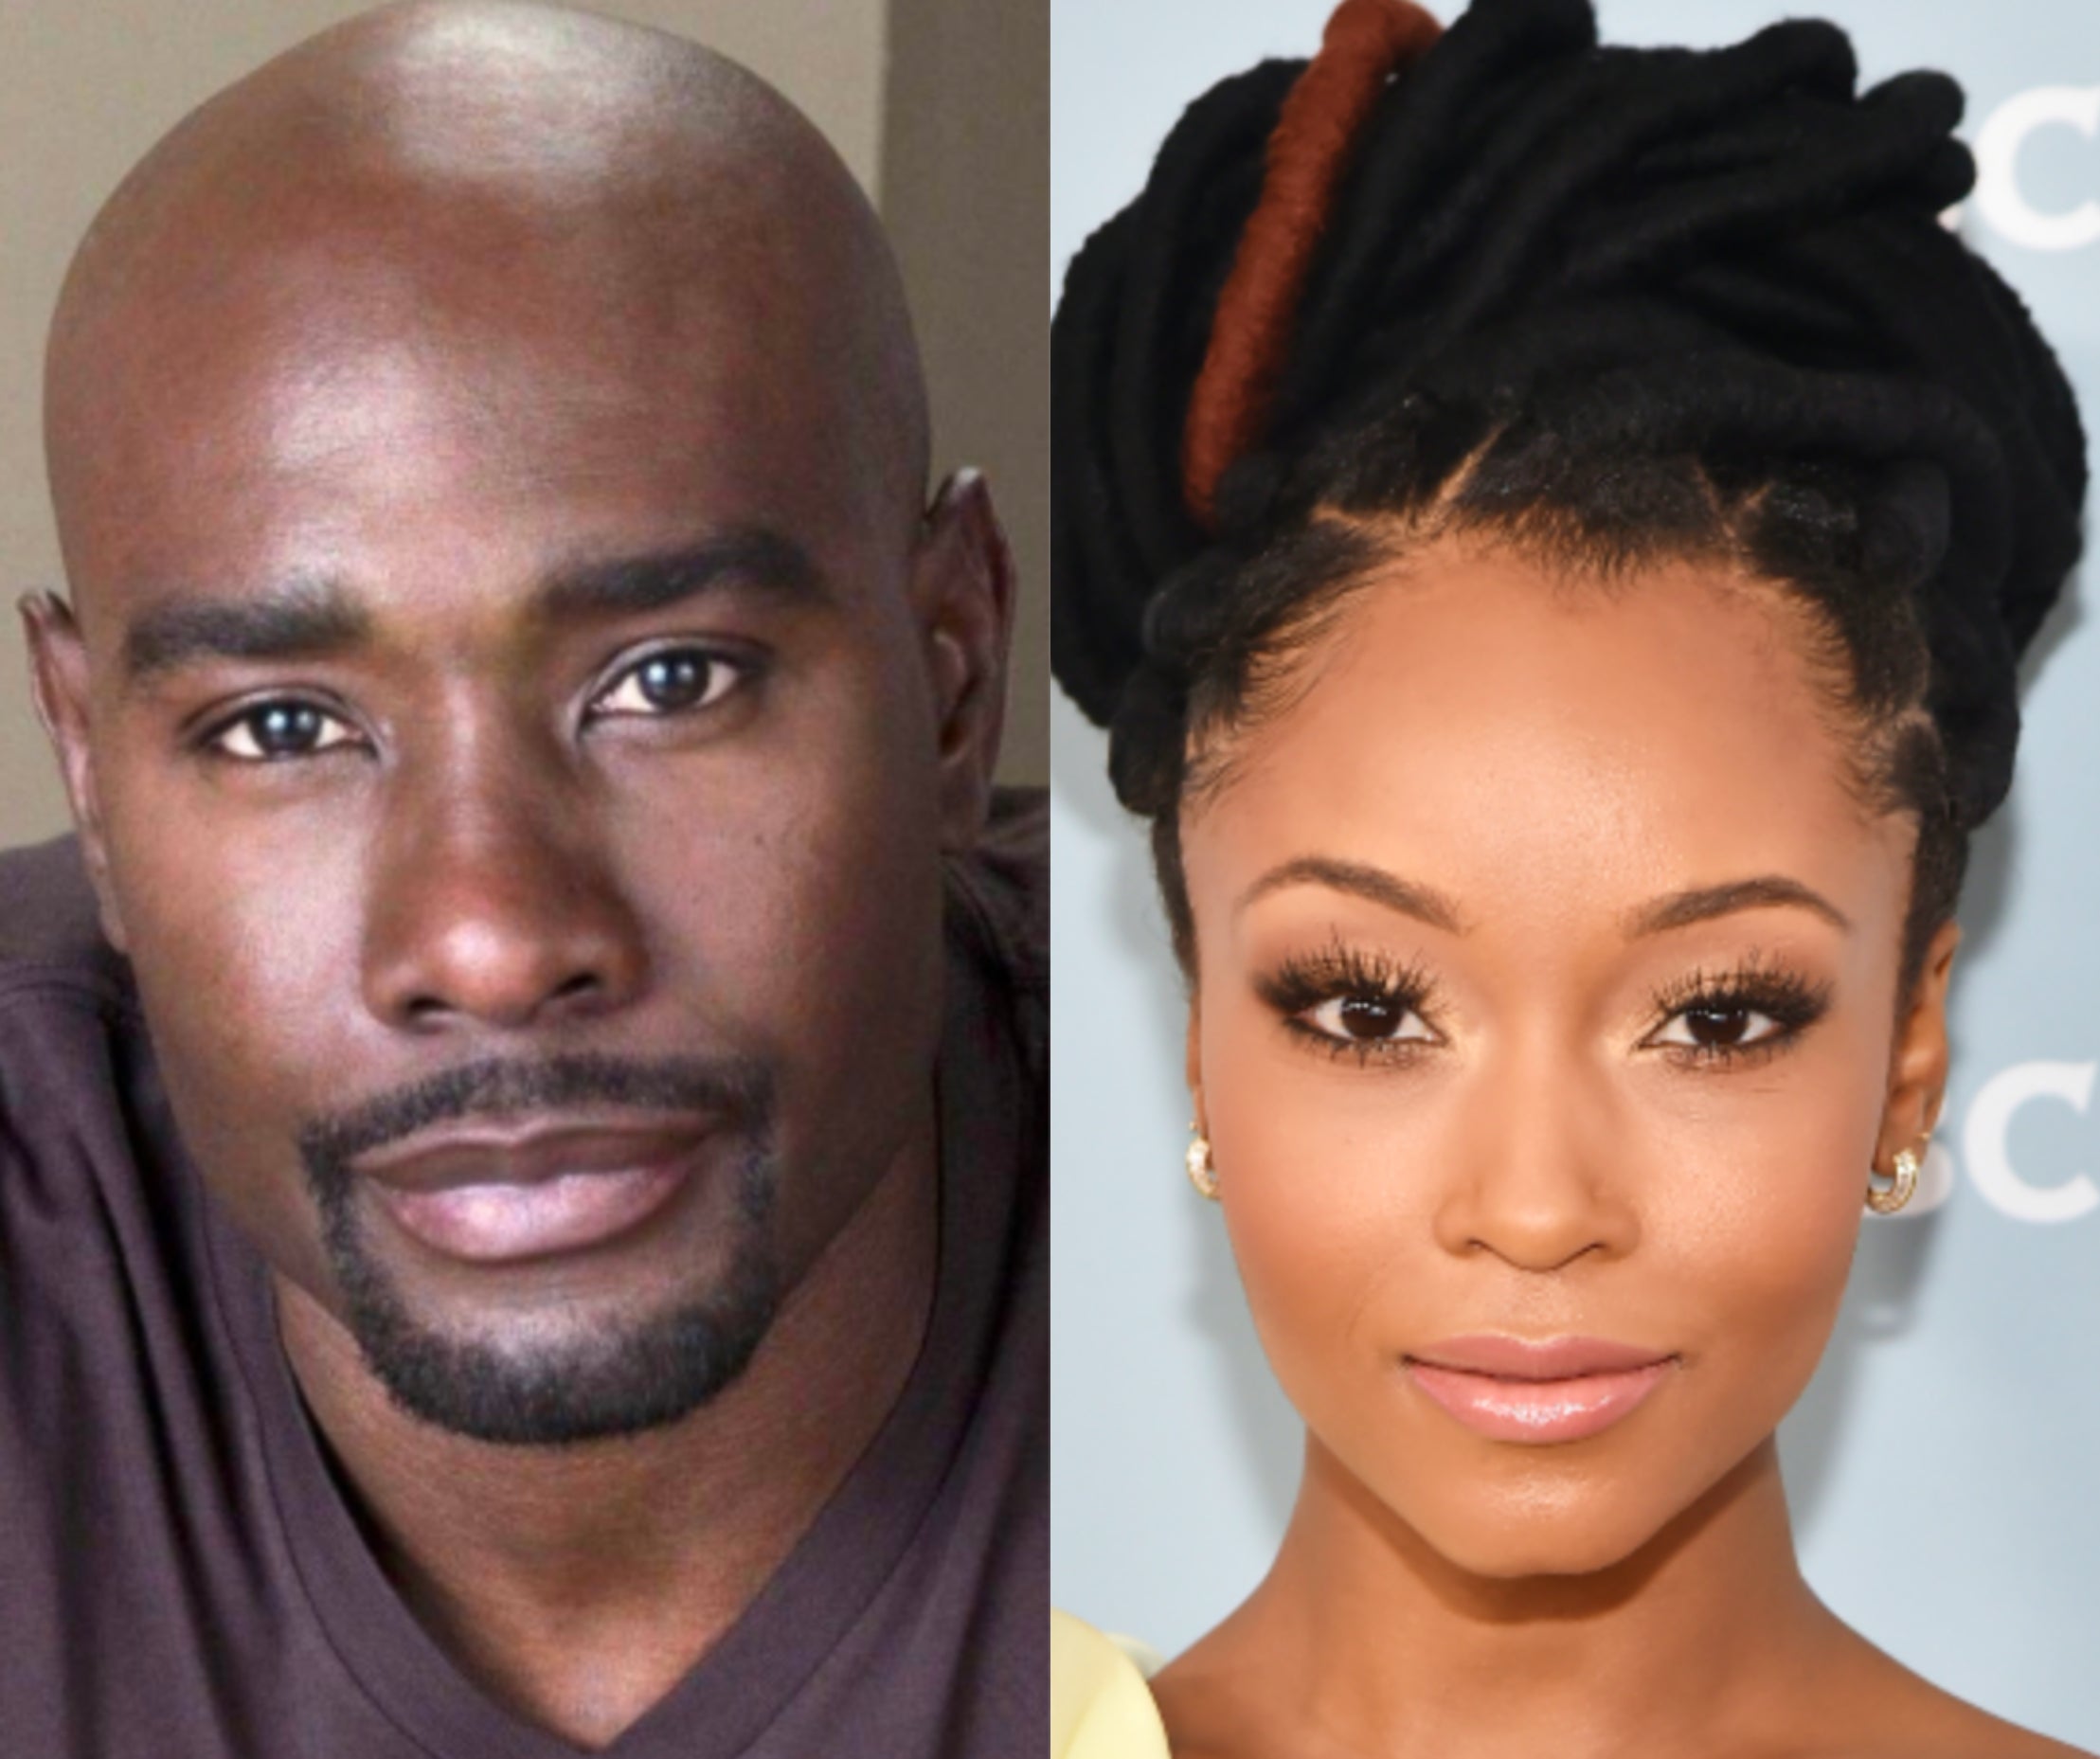 Morris Chestnut & Yaya DaCosta Talk Demystifying The 'Black Elite’ Community In New Series 'Our Kind Of People'